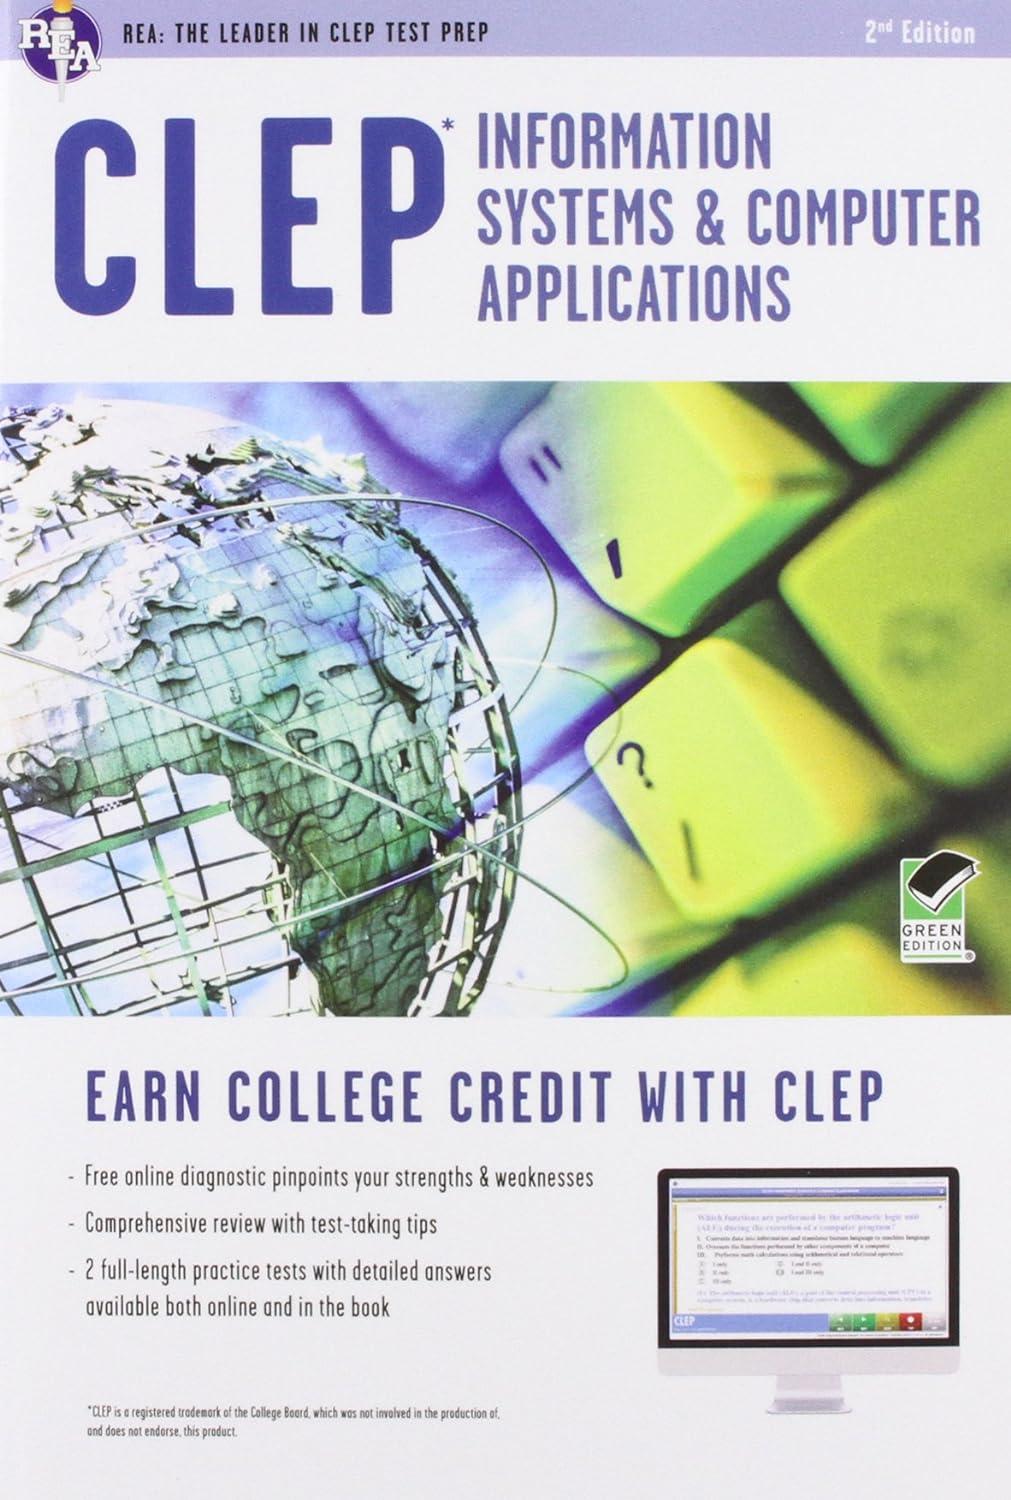 clep® information systems computer applications 2nd edition naresh dhanda 978-0738610368